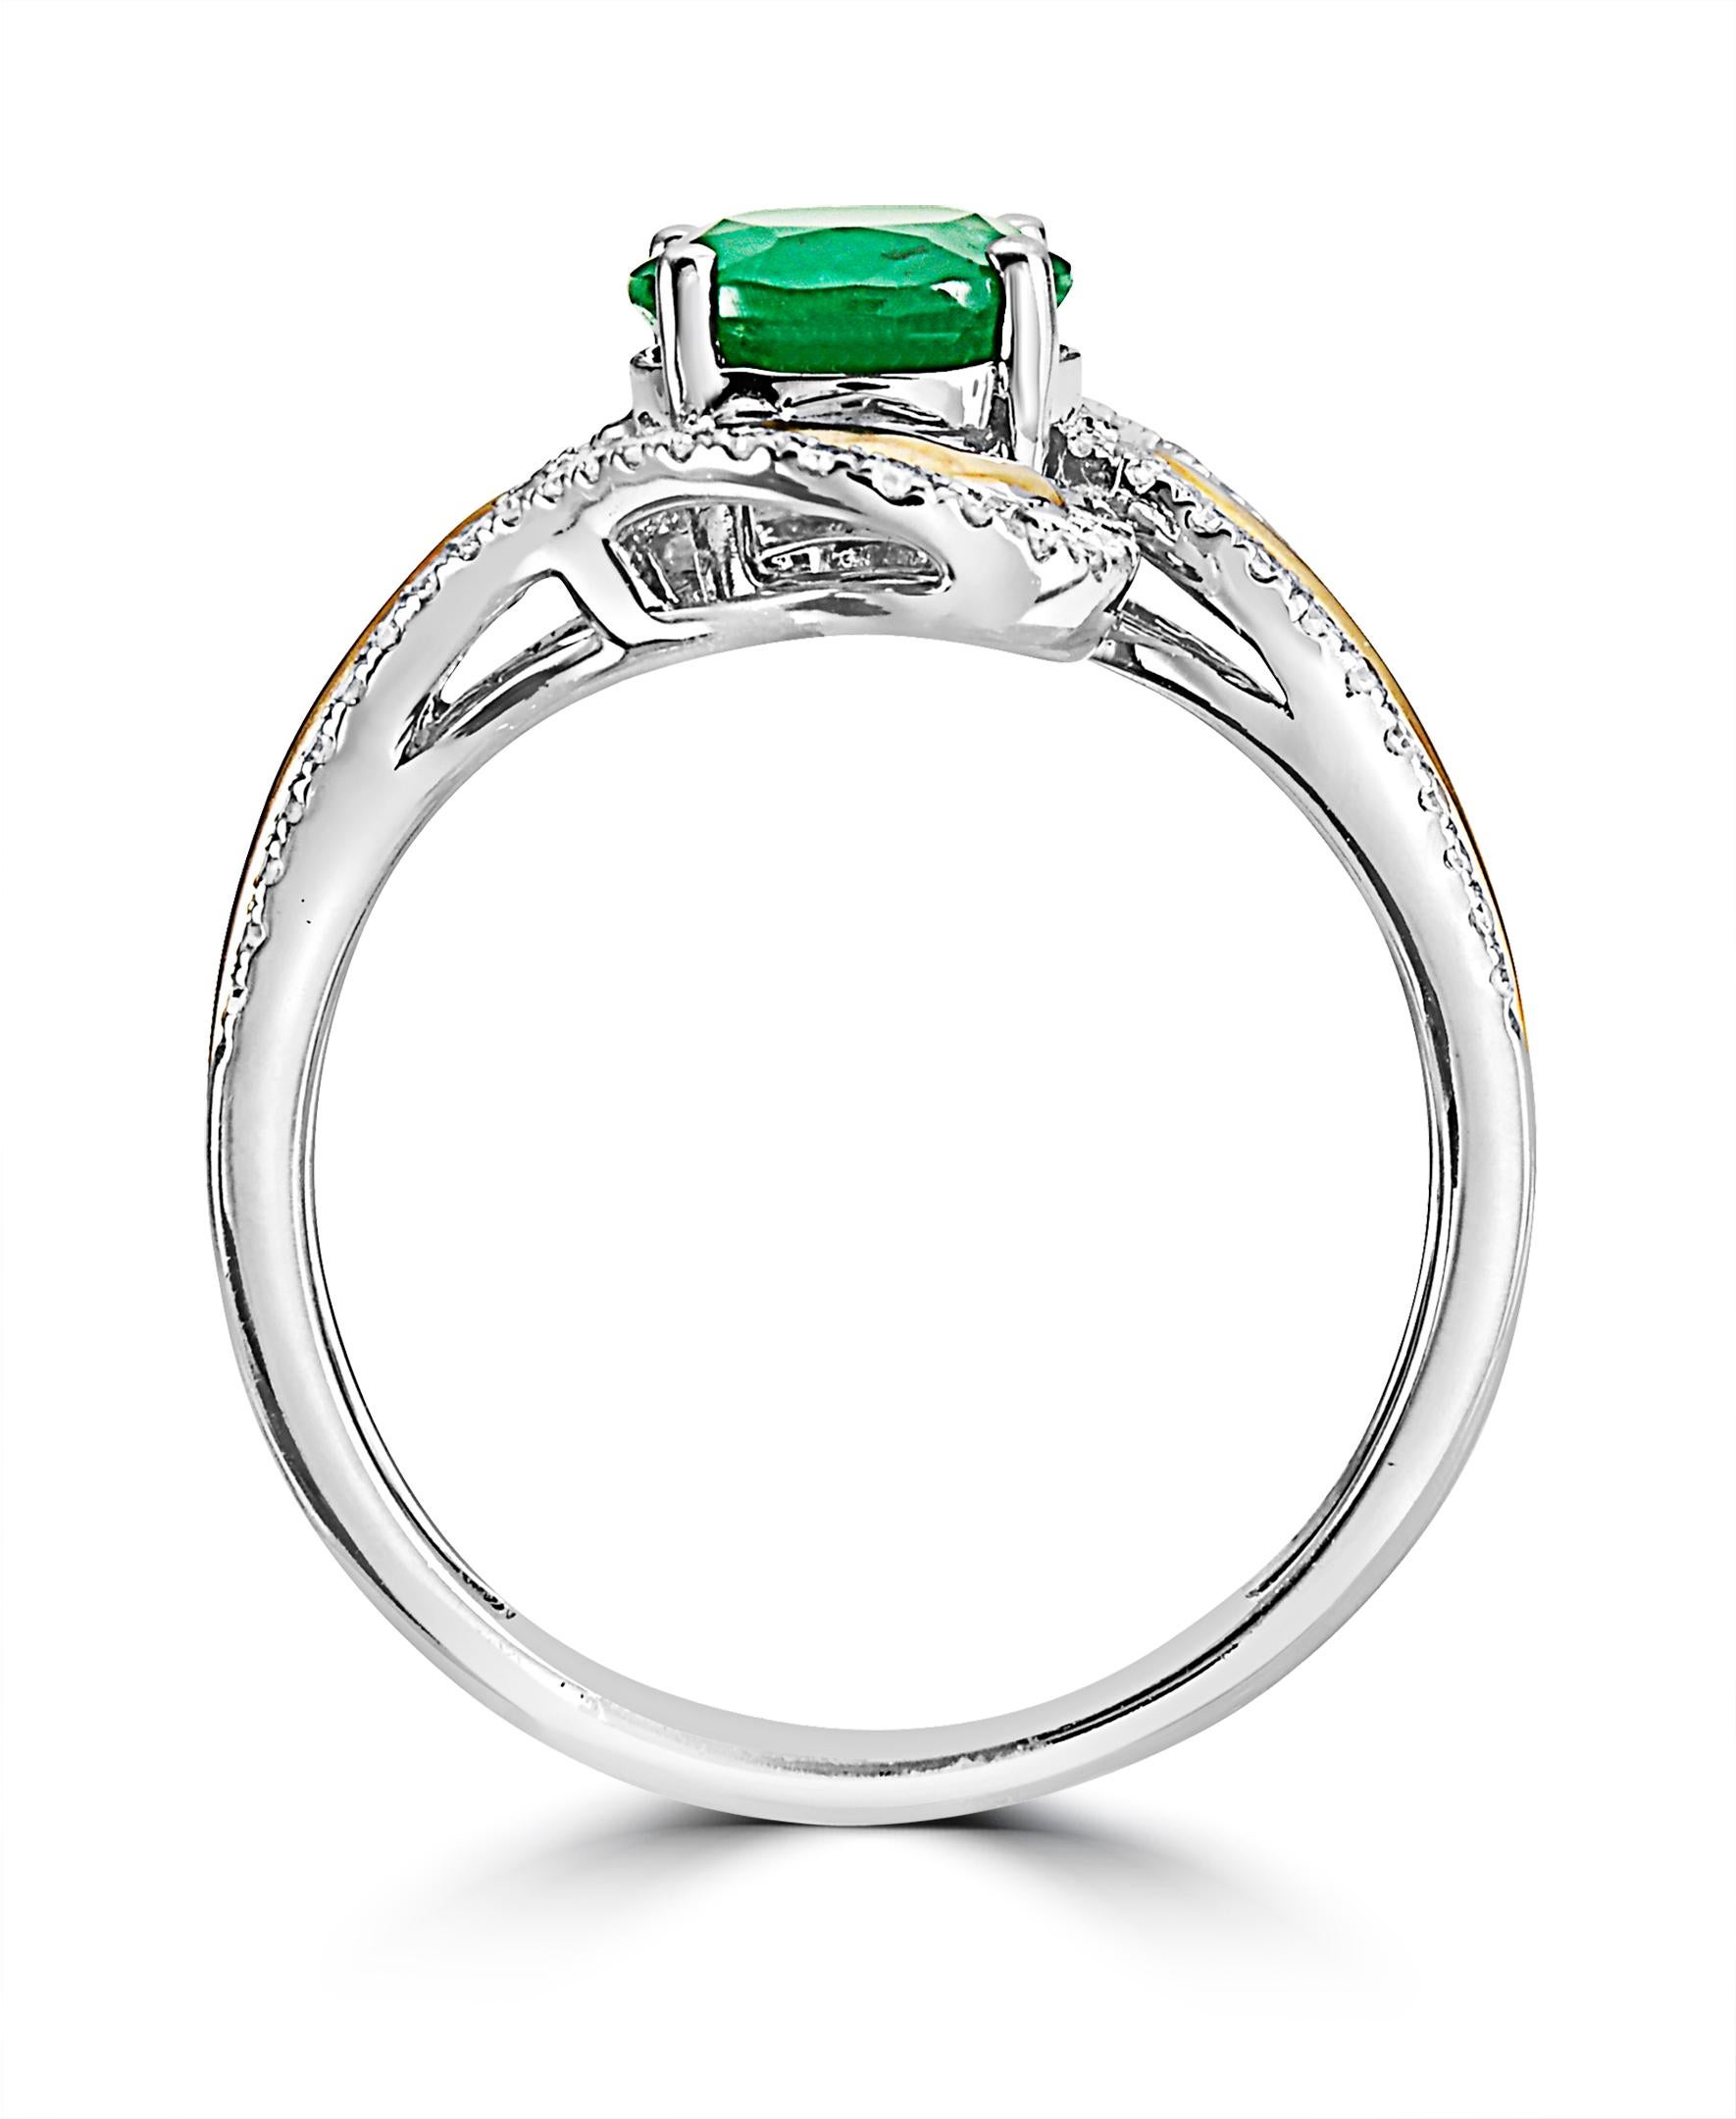 Contemporary Effy 14 Karat White & Yellow Gold Emerald and Diamond Ring  For Sale